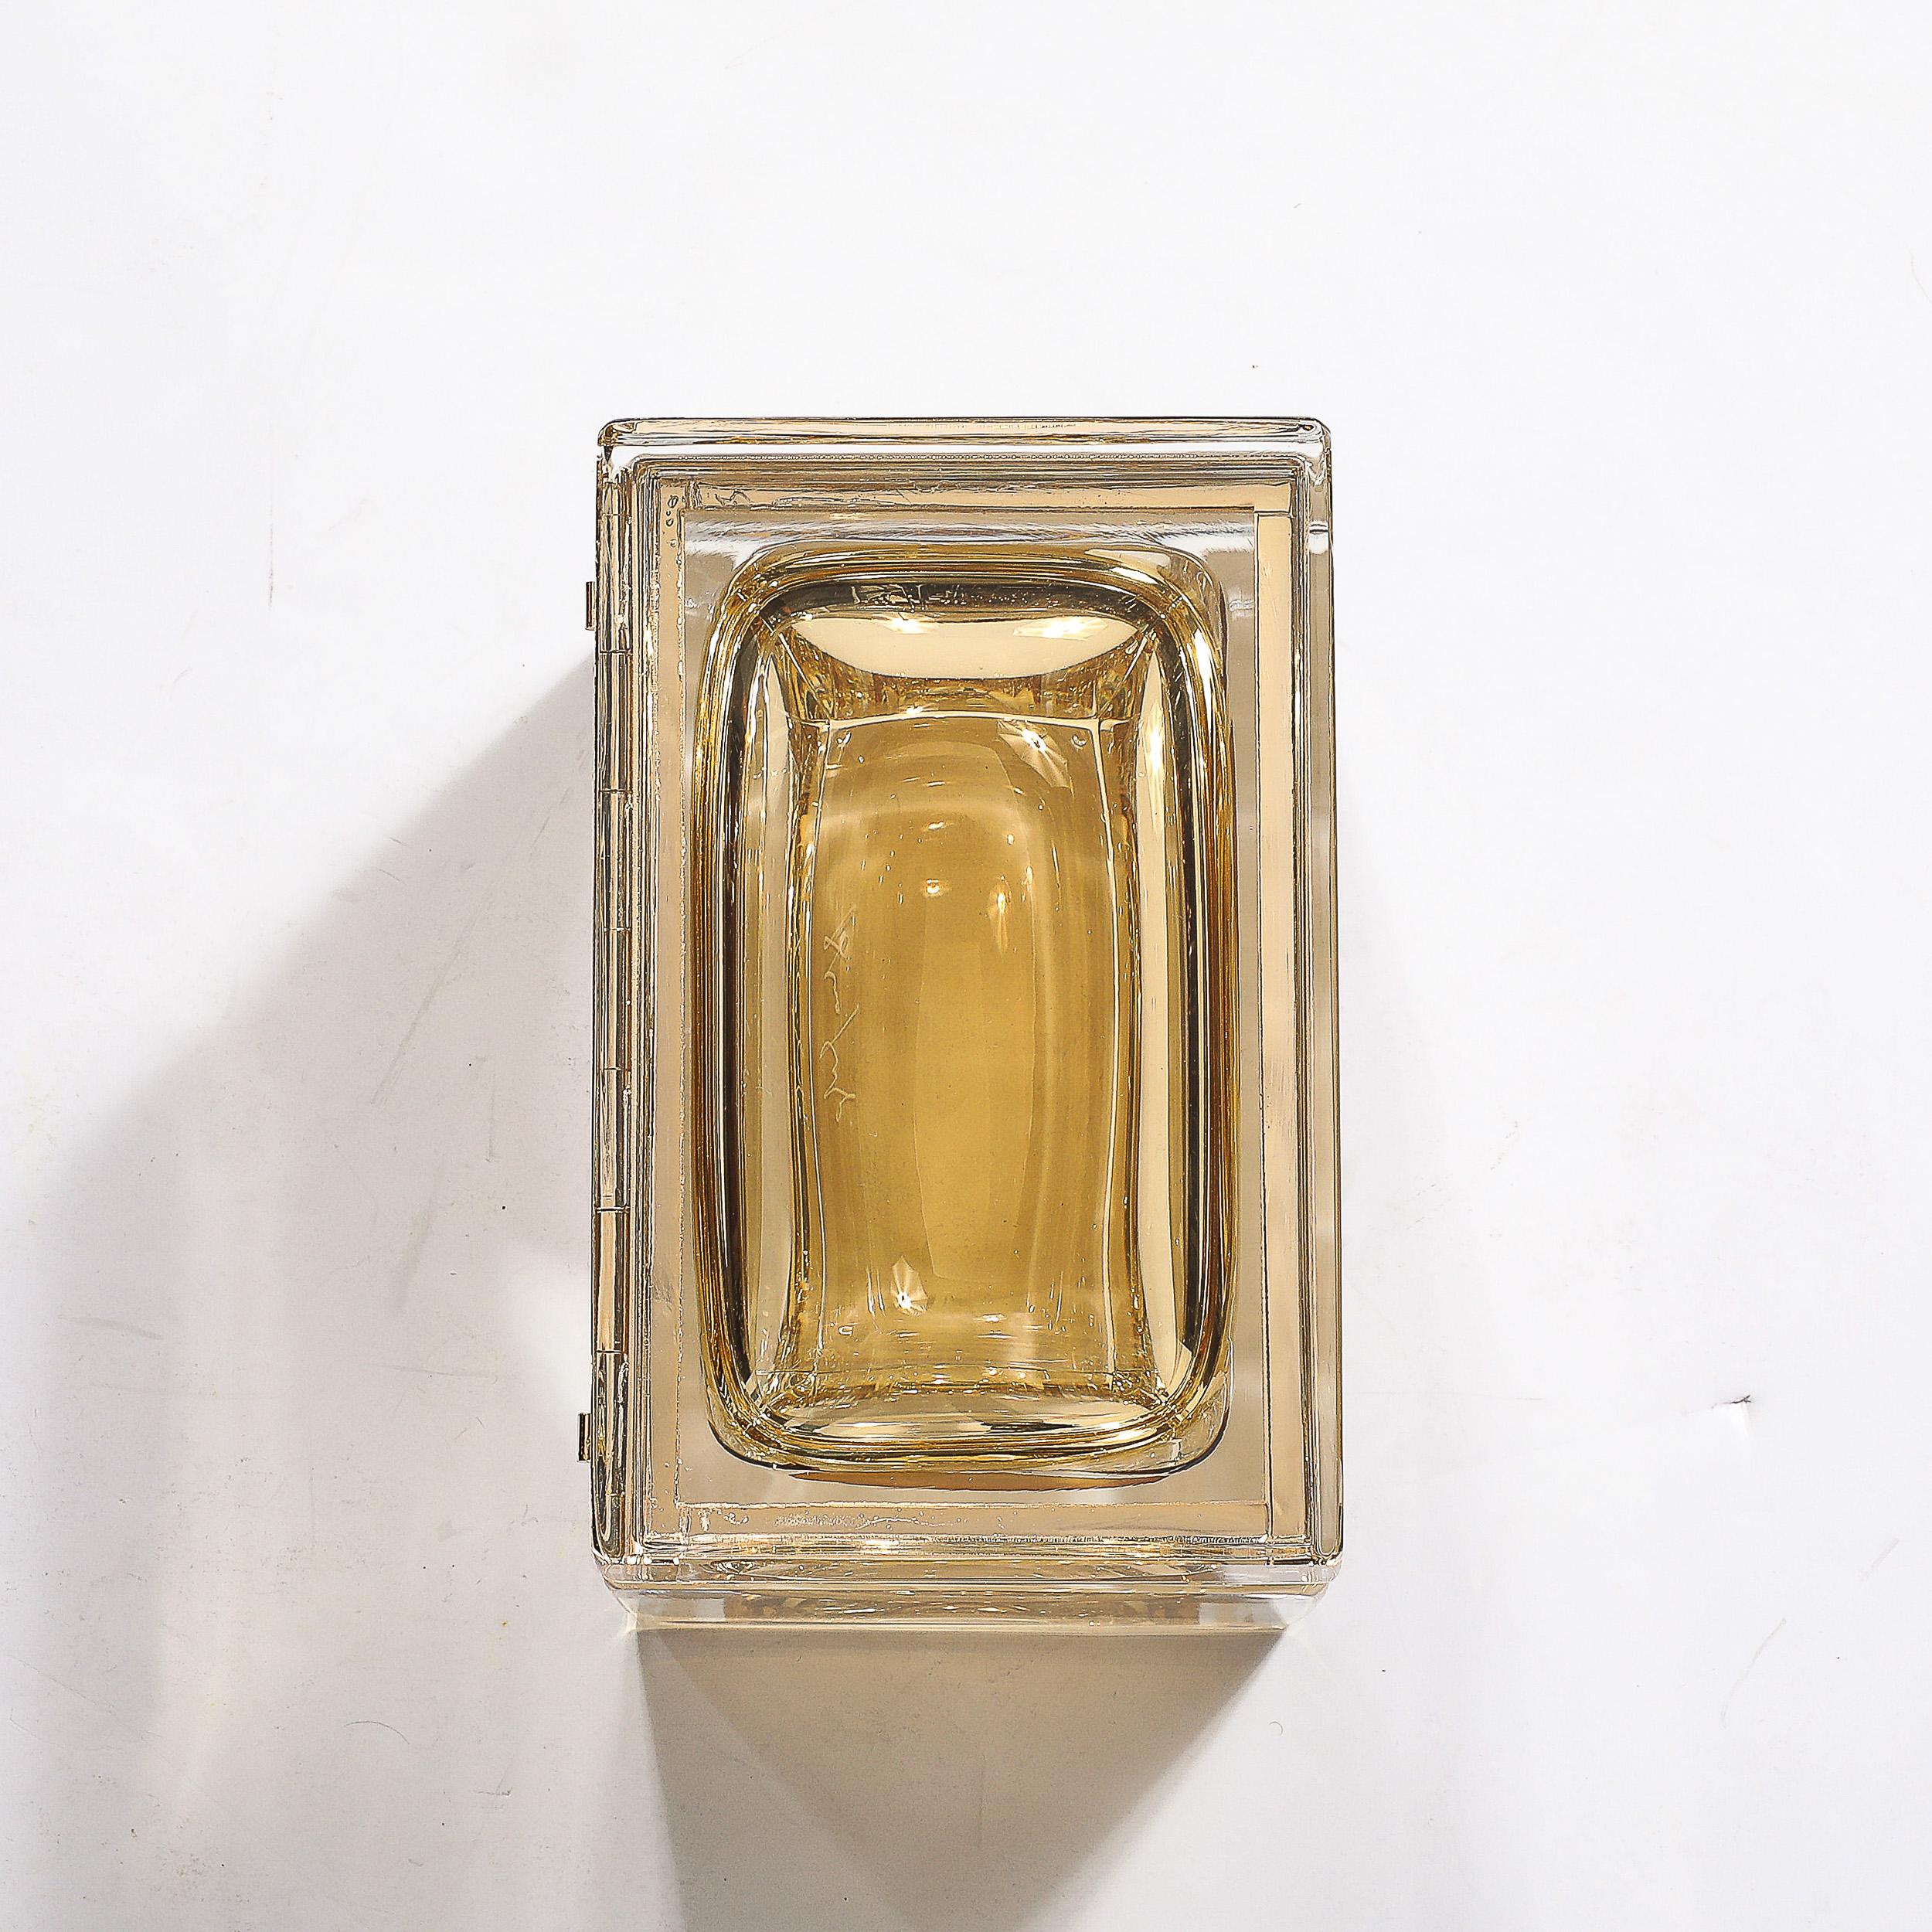 This warm and elegant Modernist Hand-Blown Murano Glass Box in Amber W/ Brass Fittings originates from Italy during the 21st Century. A sleek and minimal piece with incredible hues and materials, formed in hand-blown murano glass, transparent along